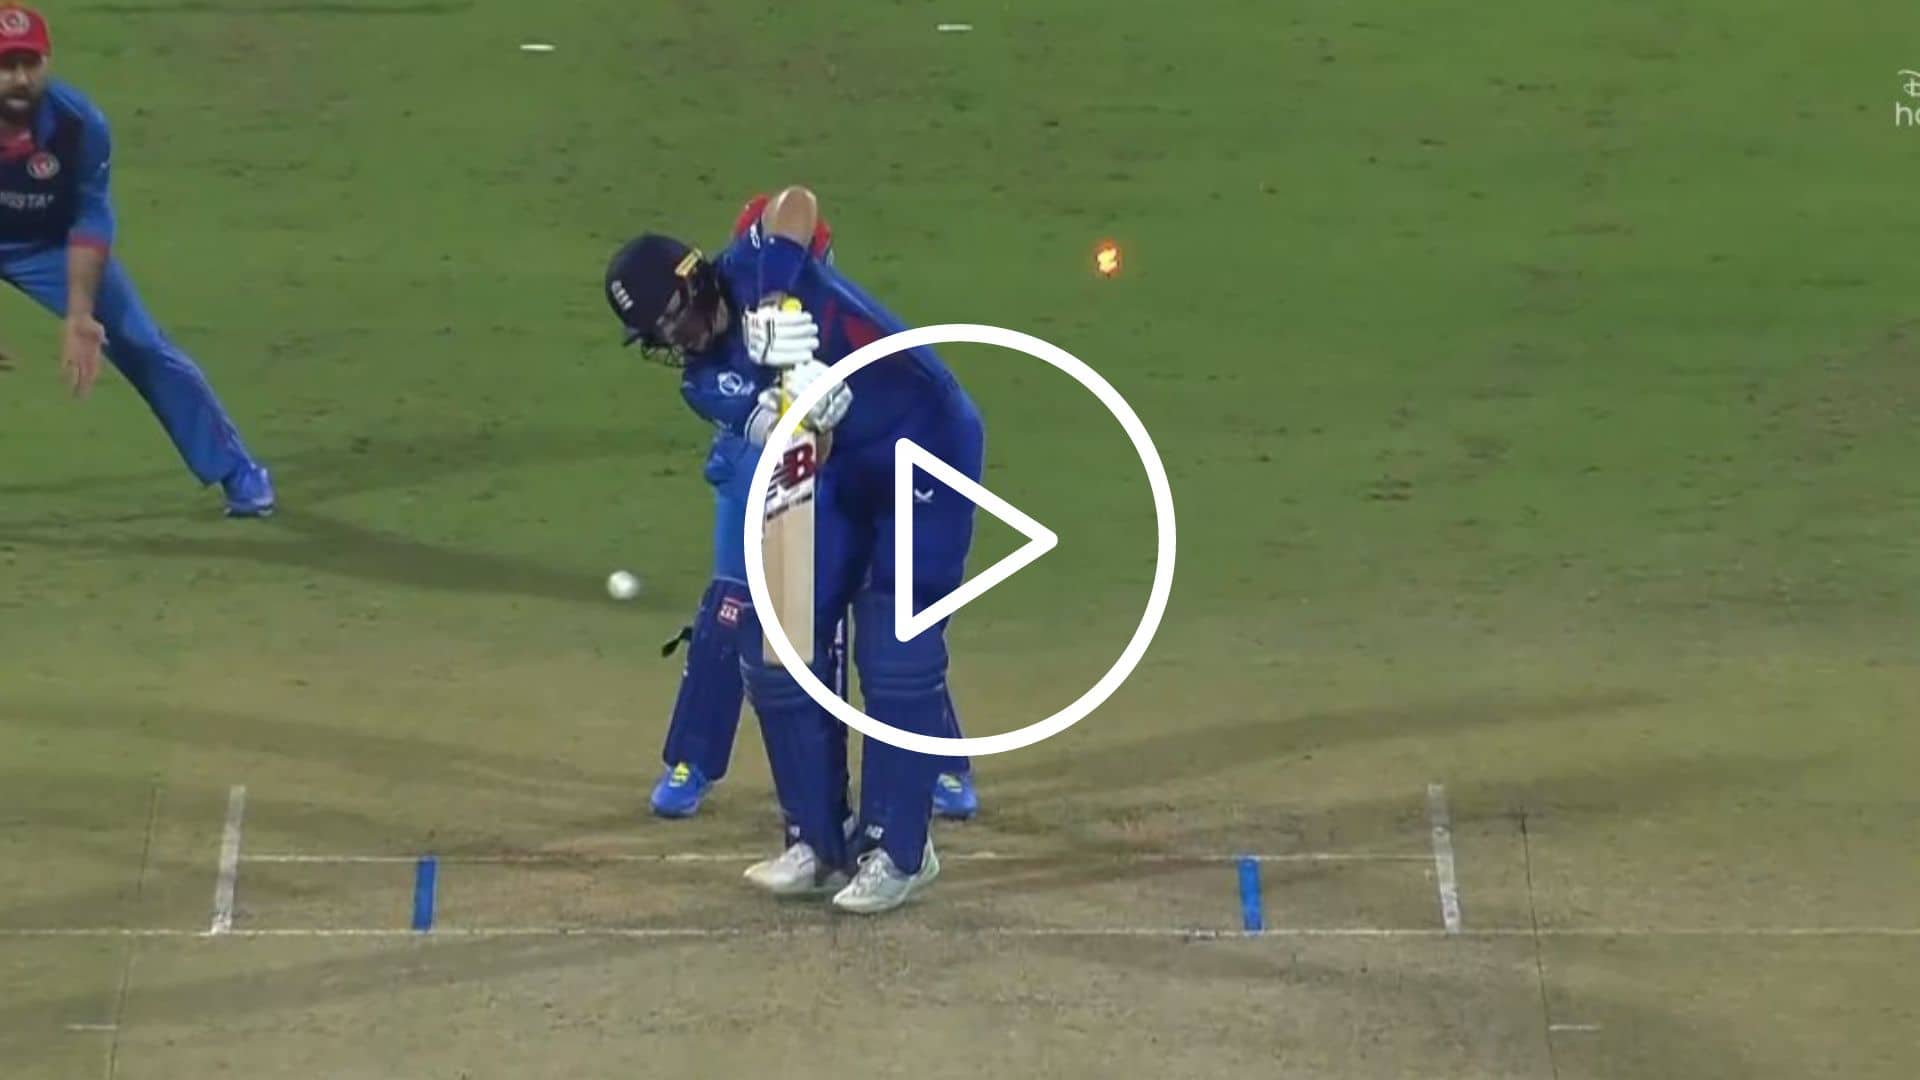 [Watch] Mujeeb Ur Rahman's Mysterious Delivery Knocks Over Joe Root To Leave ENG Stunned